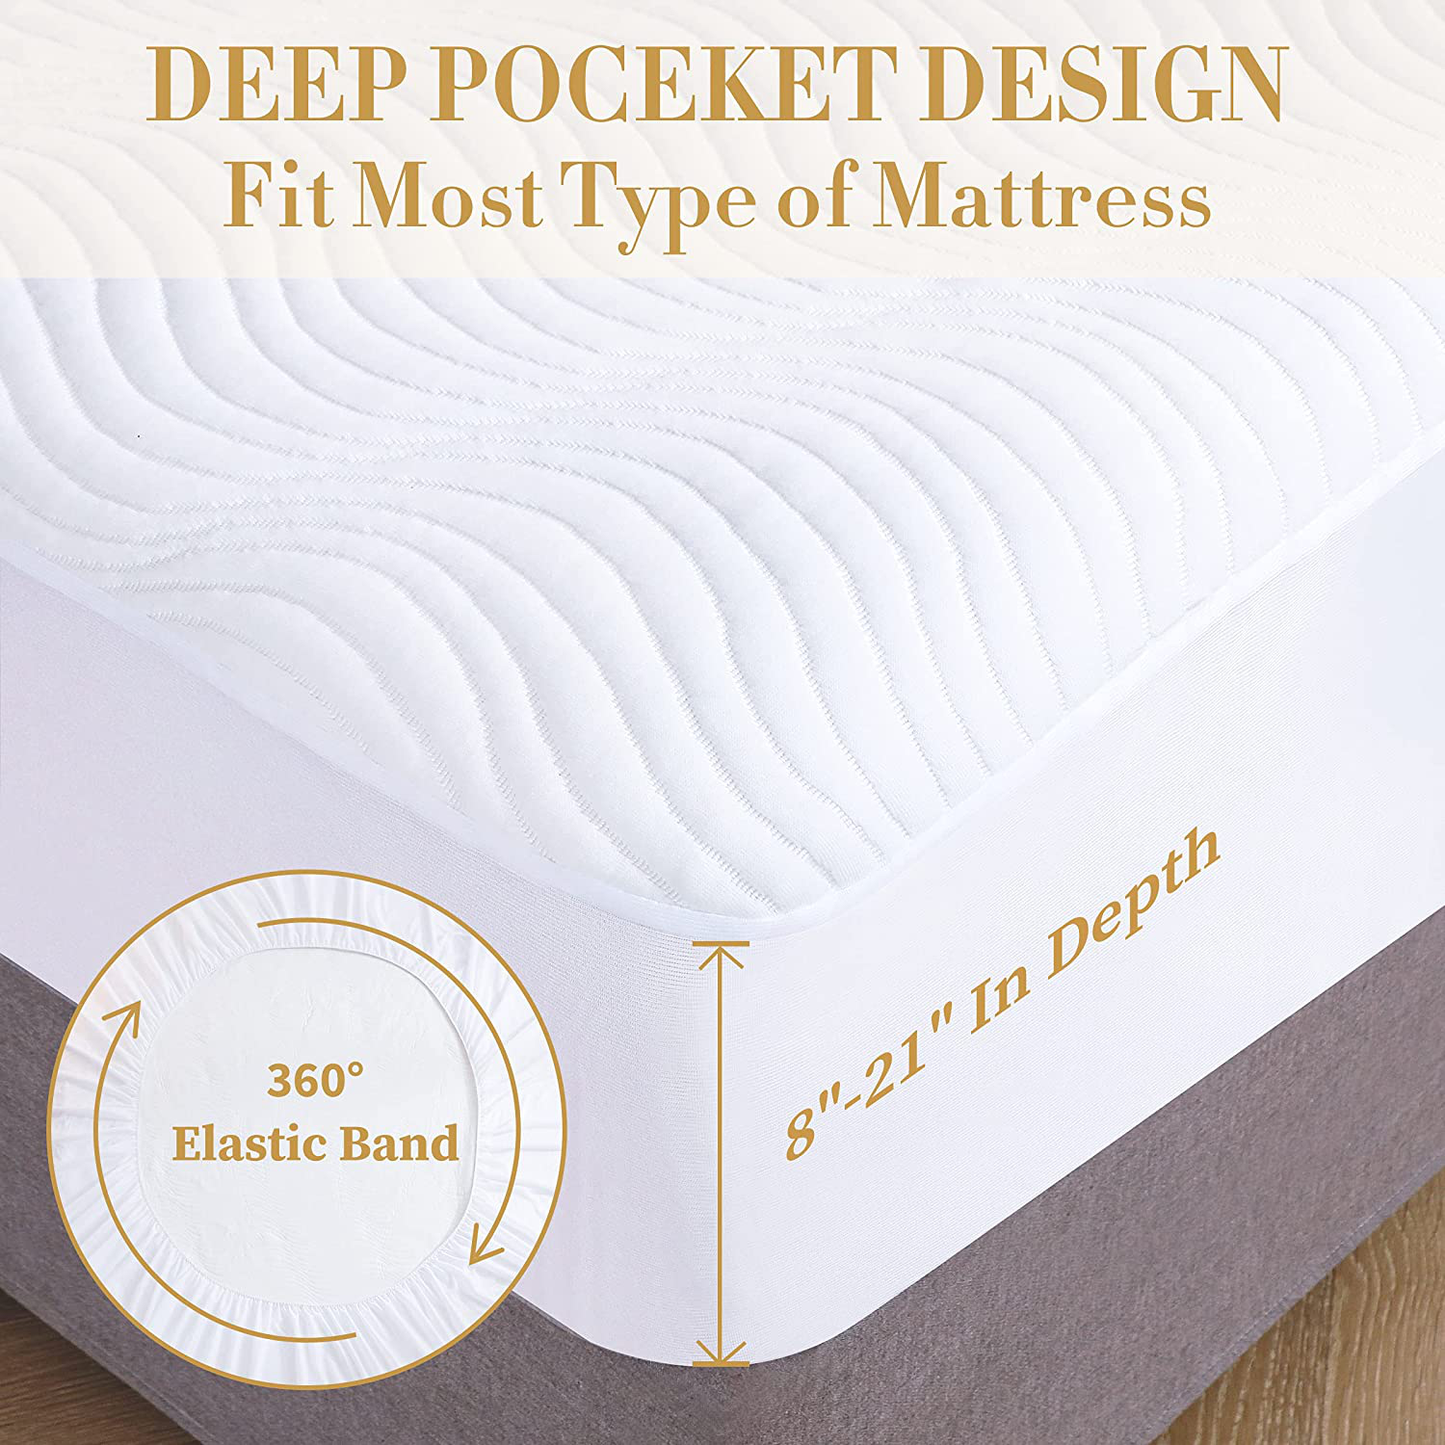 King Size Waterproof Mattress Pad, 3D Air Fiber Fabric Mattress Protector, Stain Release Breathable Smooth Mattress Cover Stretches Up to 21" Inches Deep Pocket